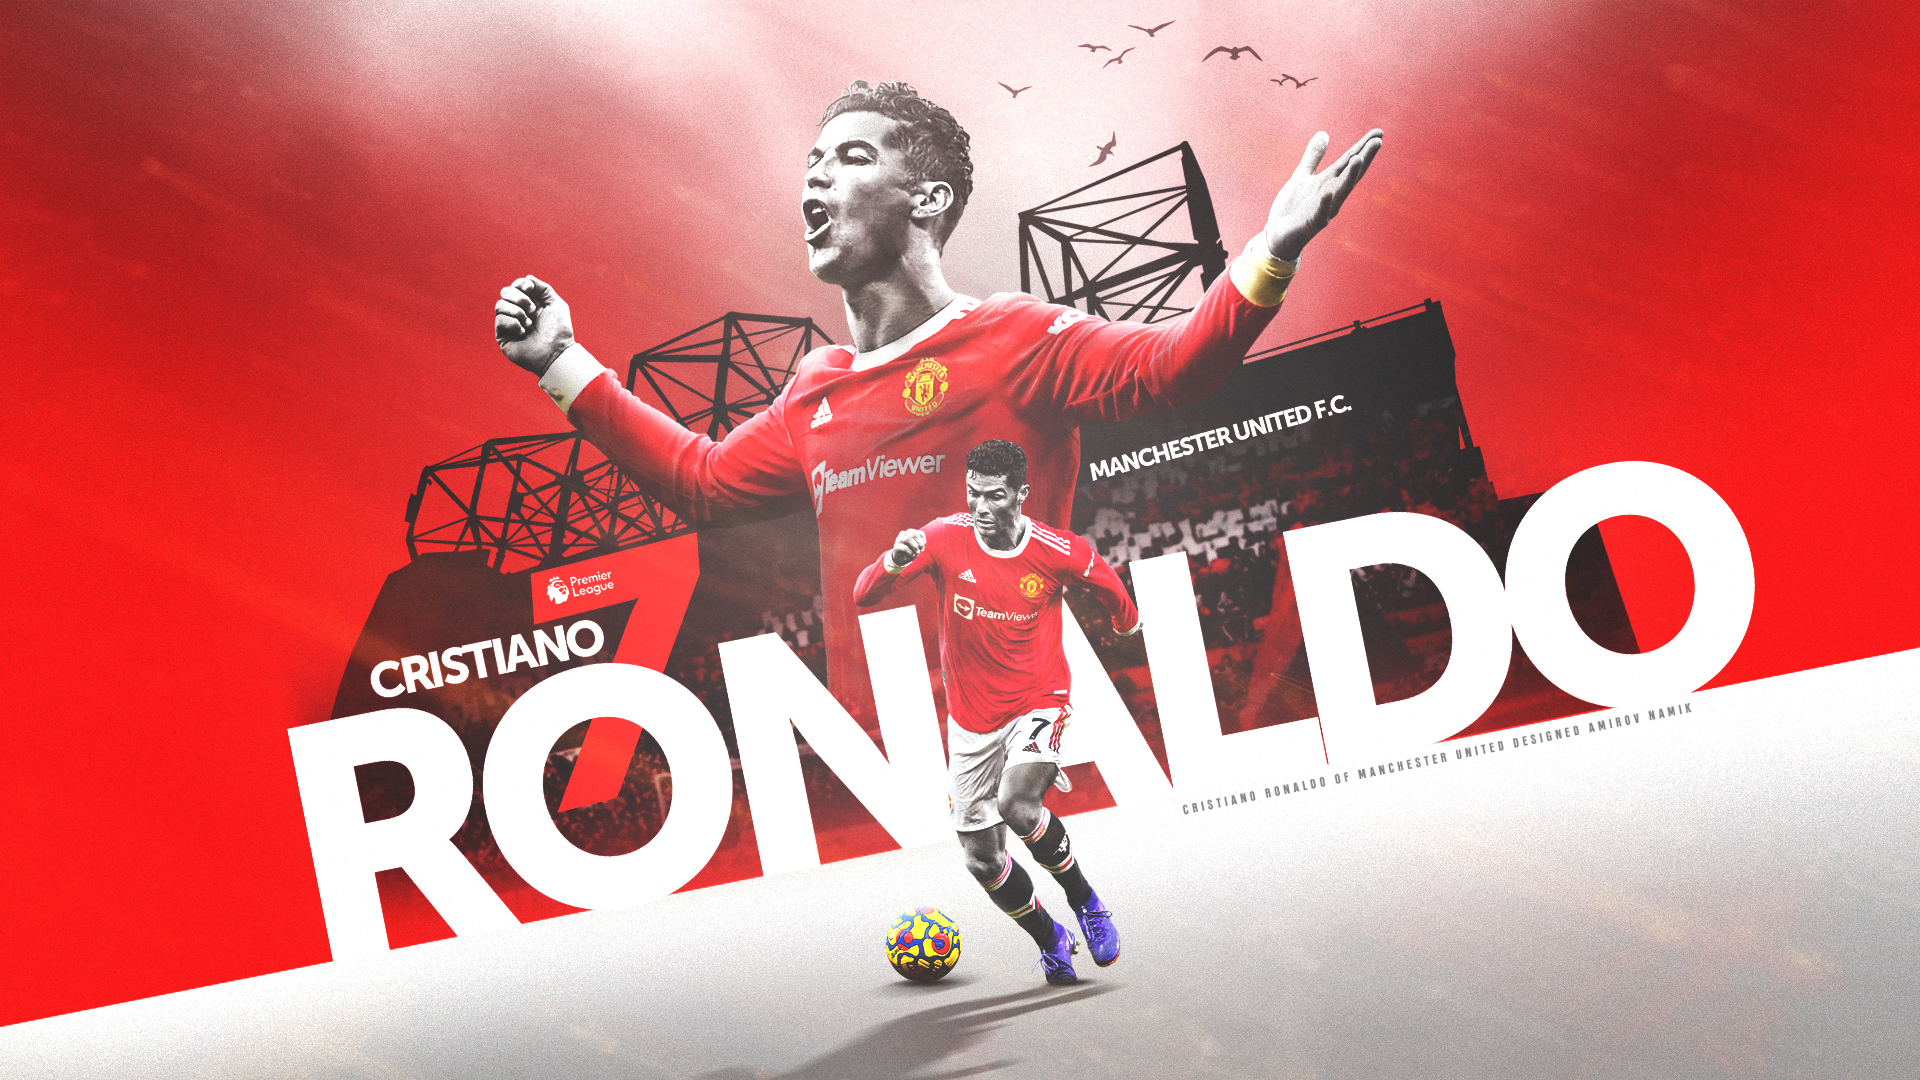 Cristiano ronaldo 1080P 2k 4k HD wallpapers backgrounds free download   Rare Gallery